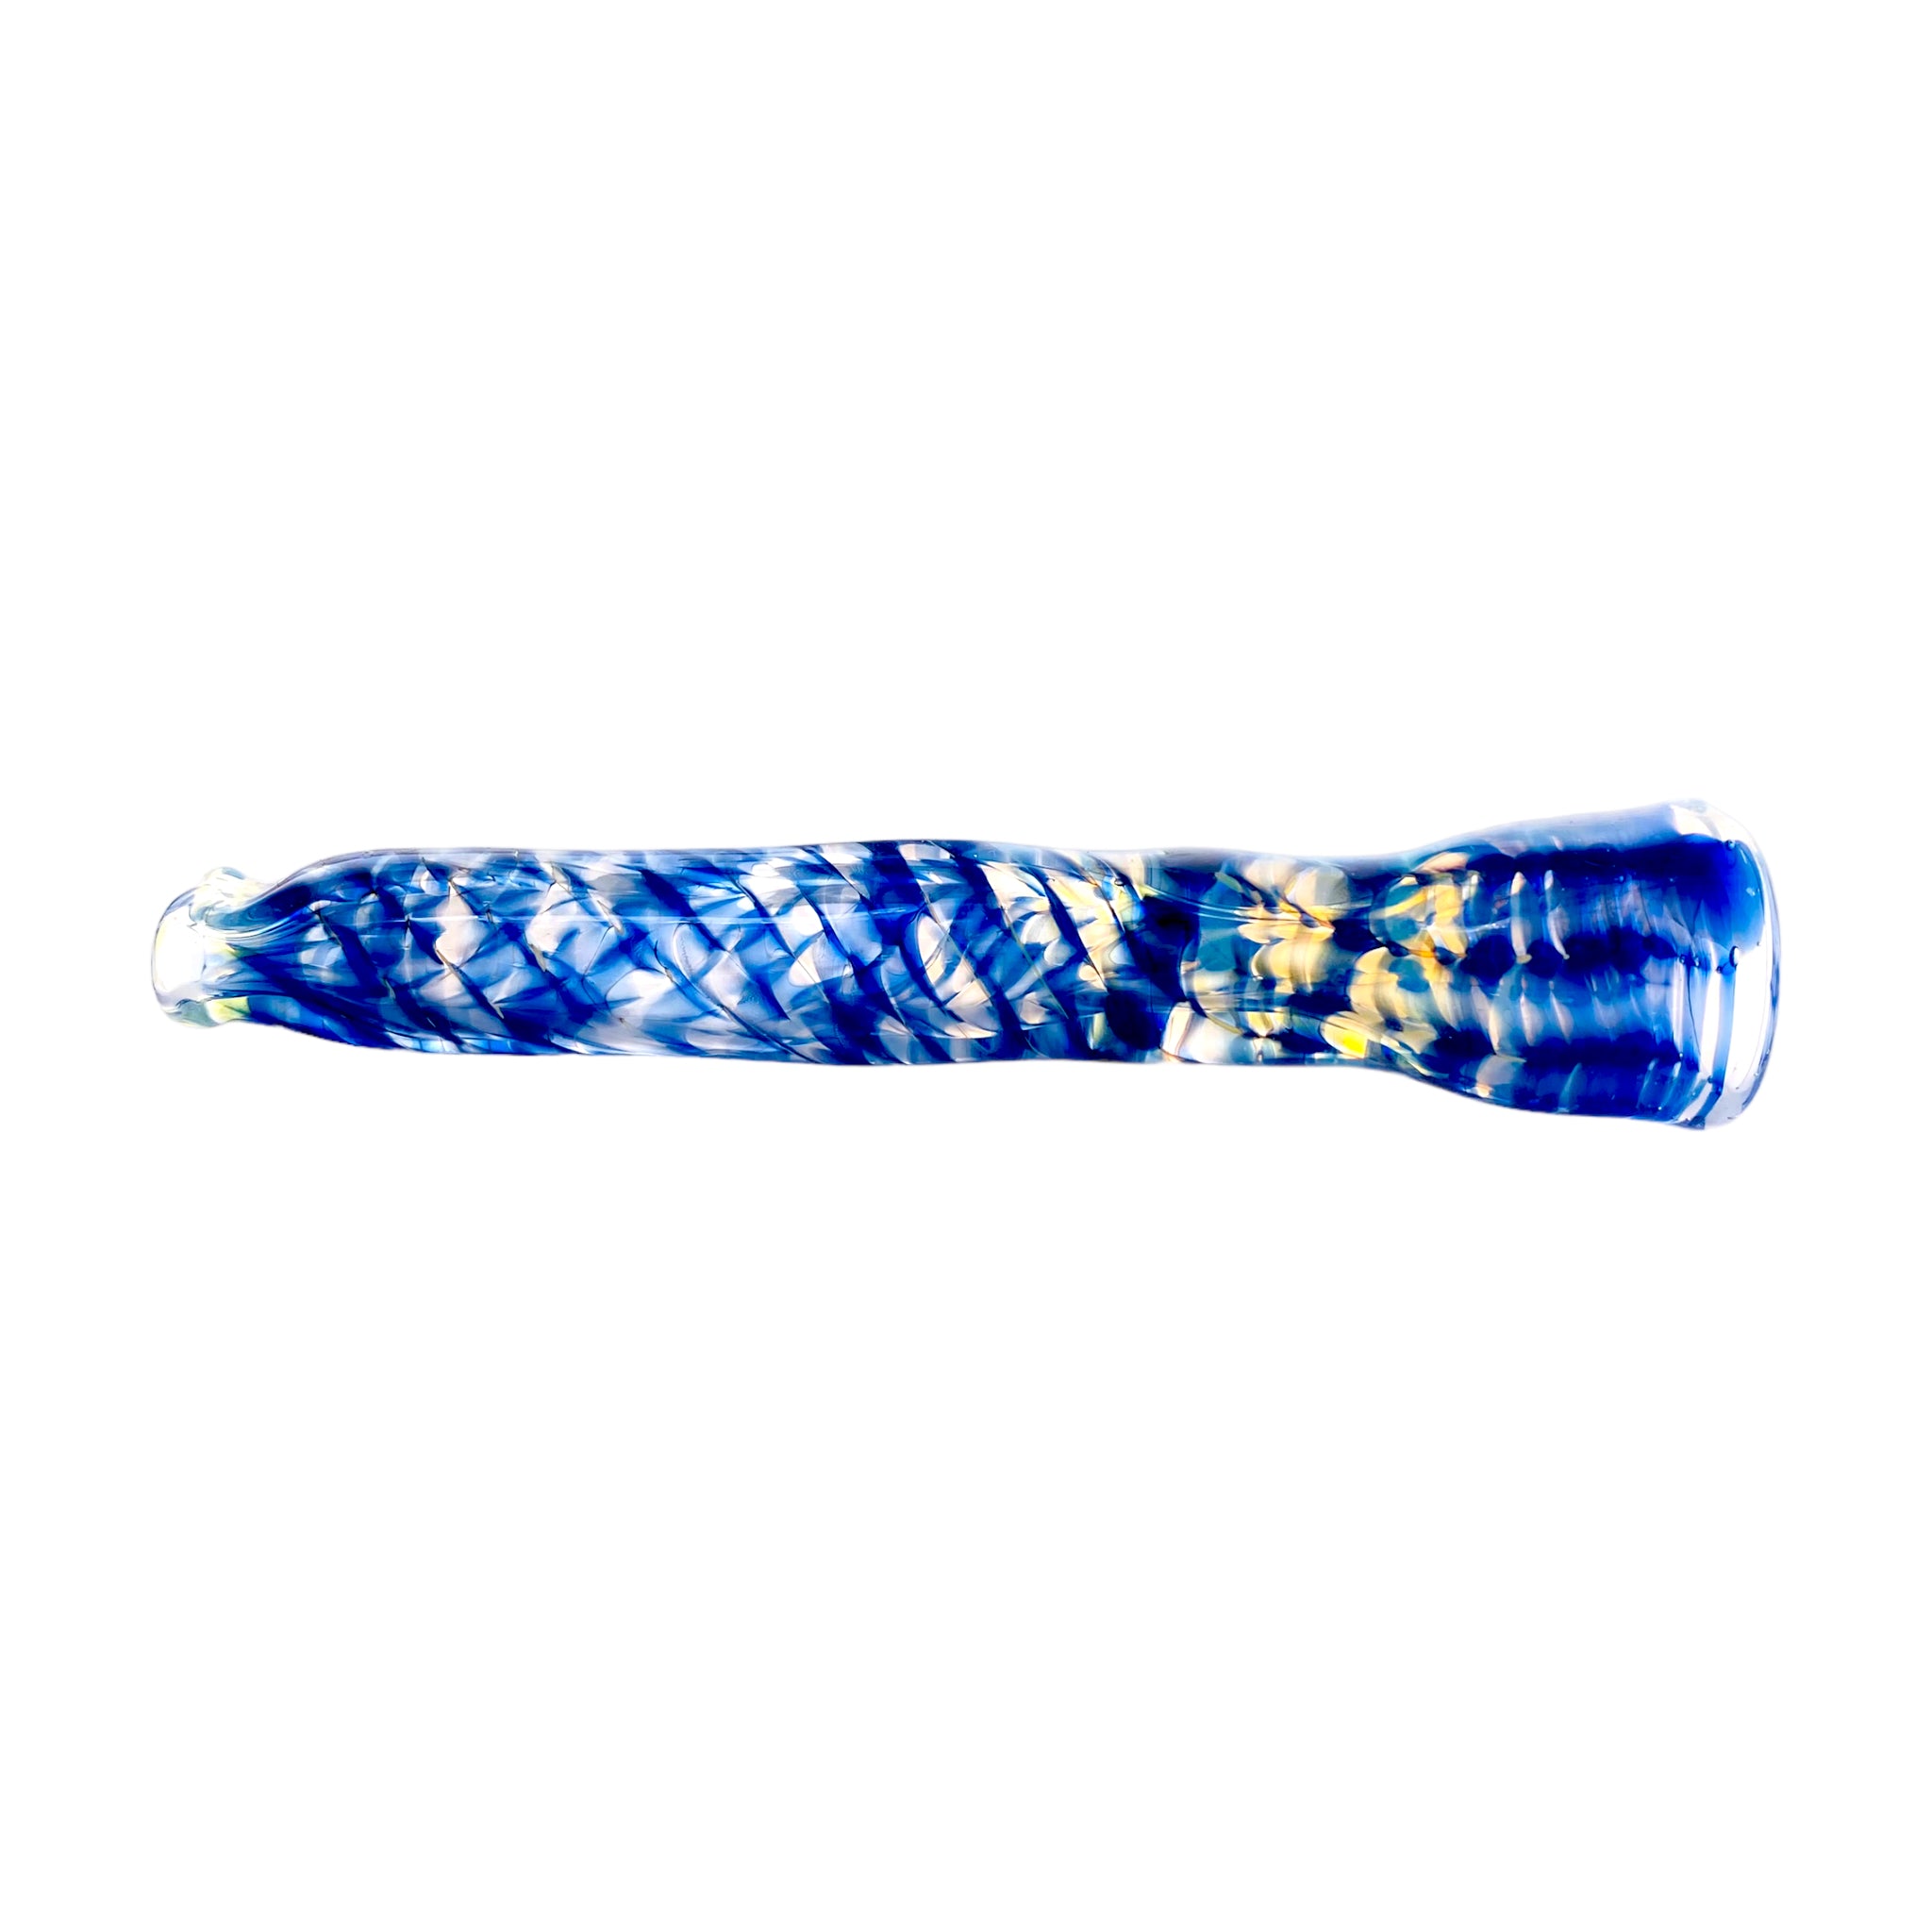 Glass Chillum Pipe - Blue Wig Wag One Hitter